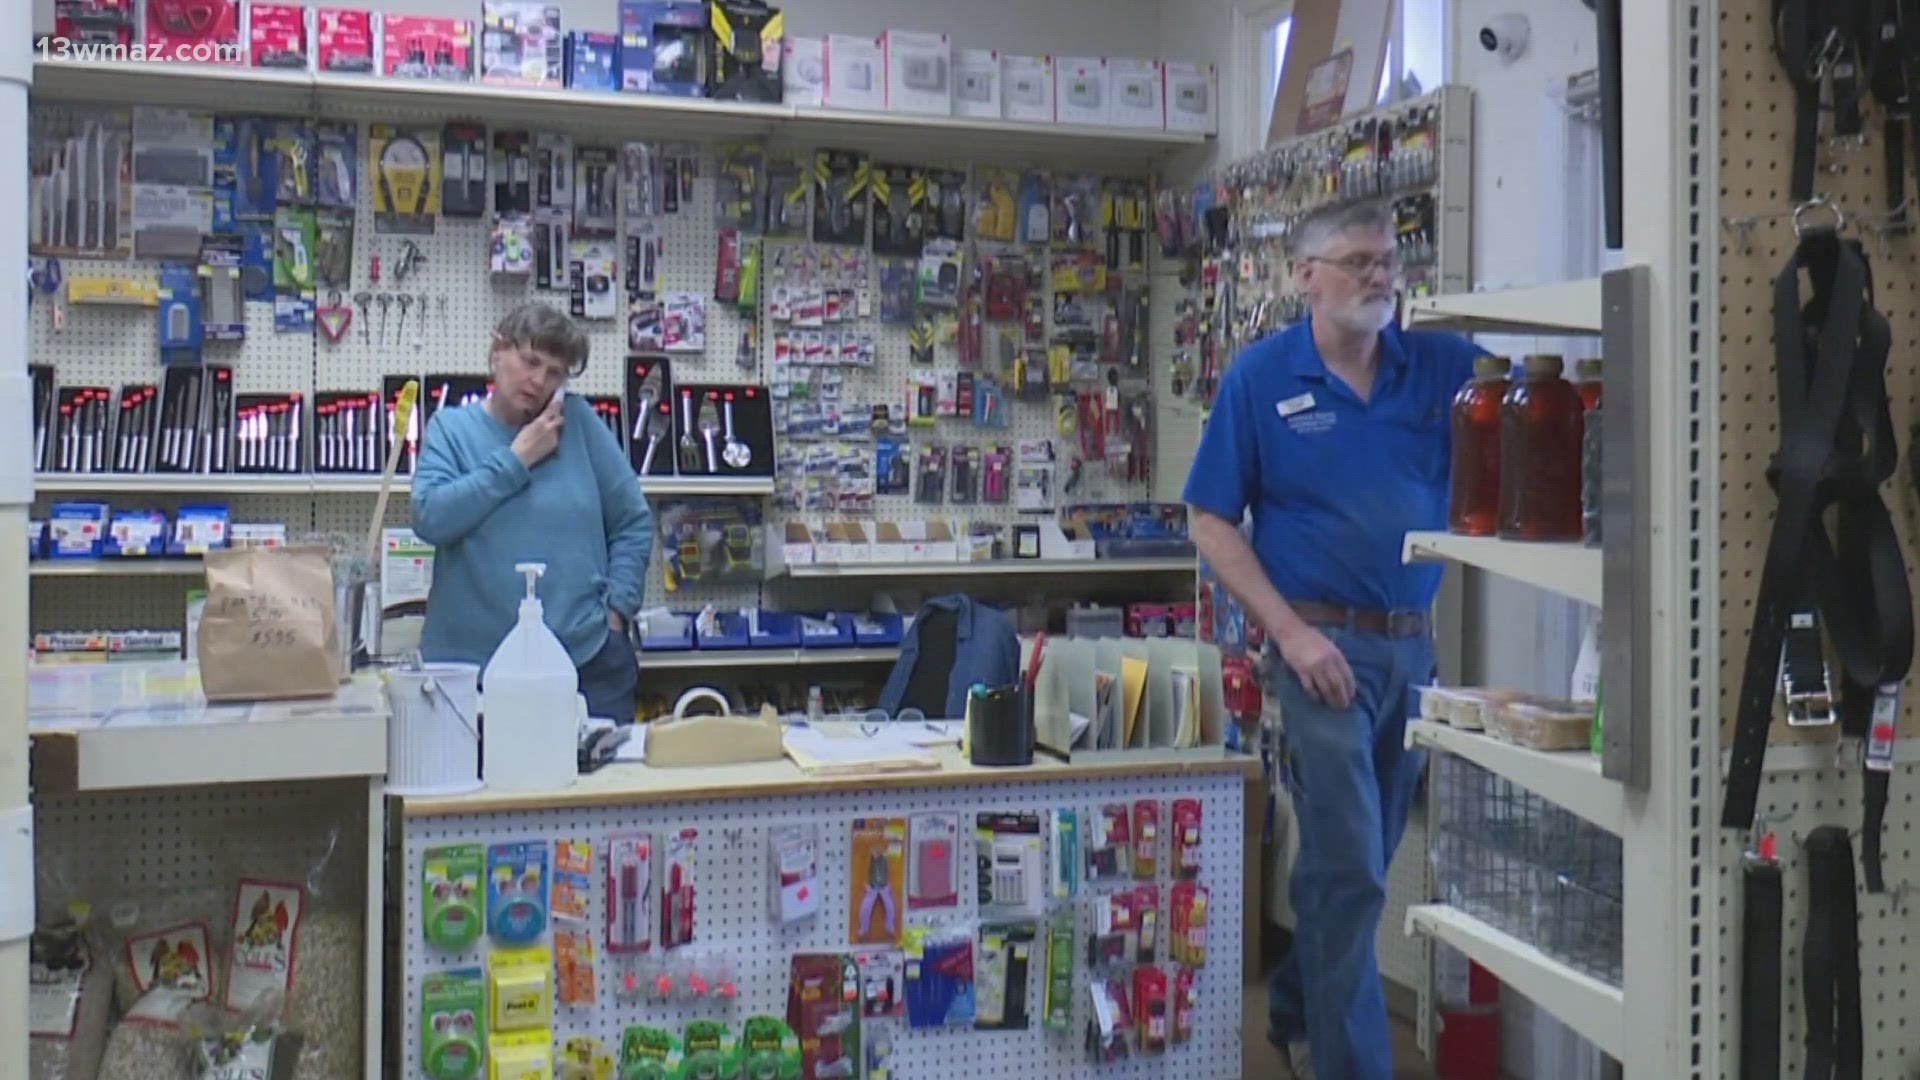 Karsten and Denson Hardware opened in 1917, originally as a store for farmers. Now, the owner might be hanging up his hat and retiring.